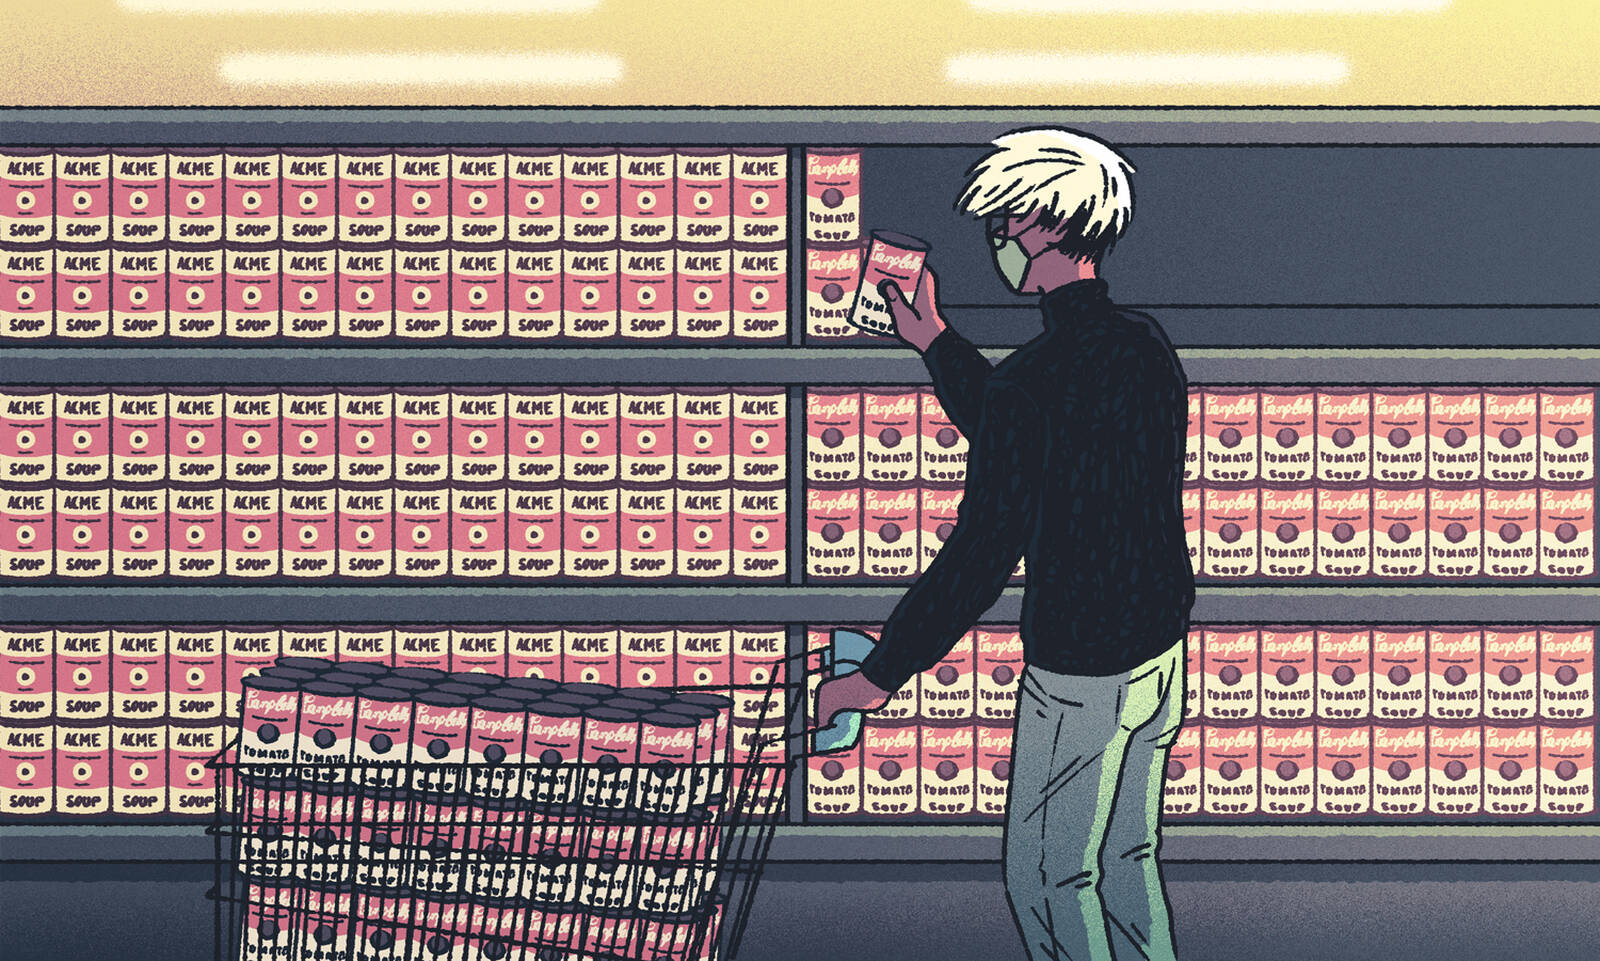 Man fills grocery cart with Campbell's soup cans